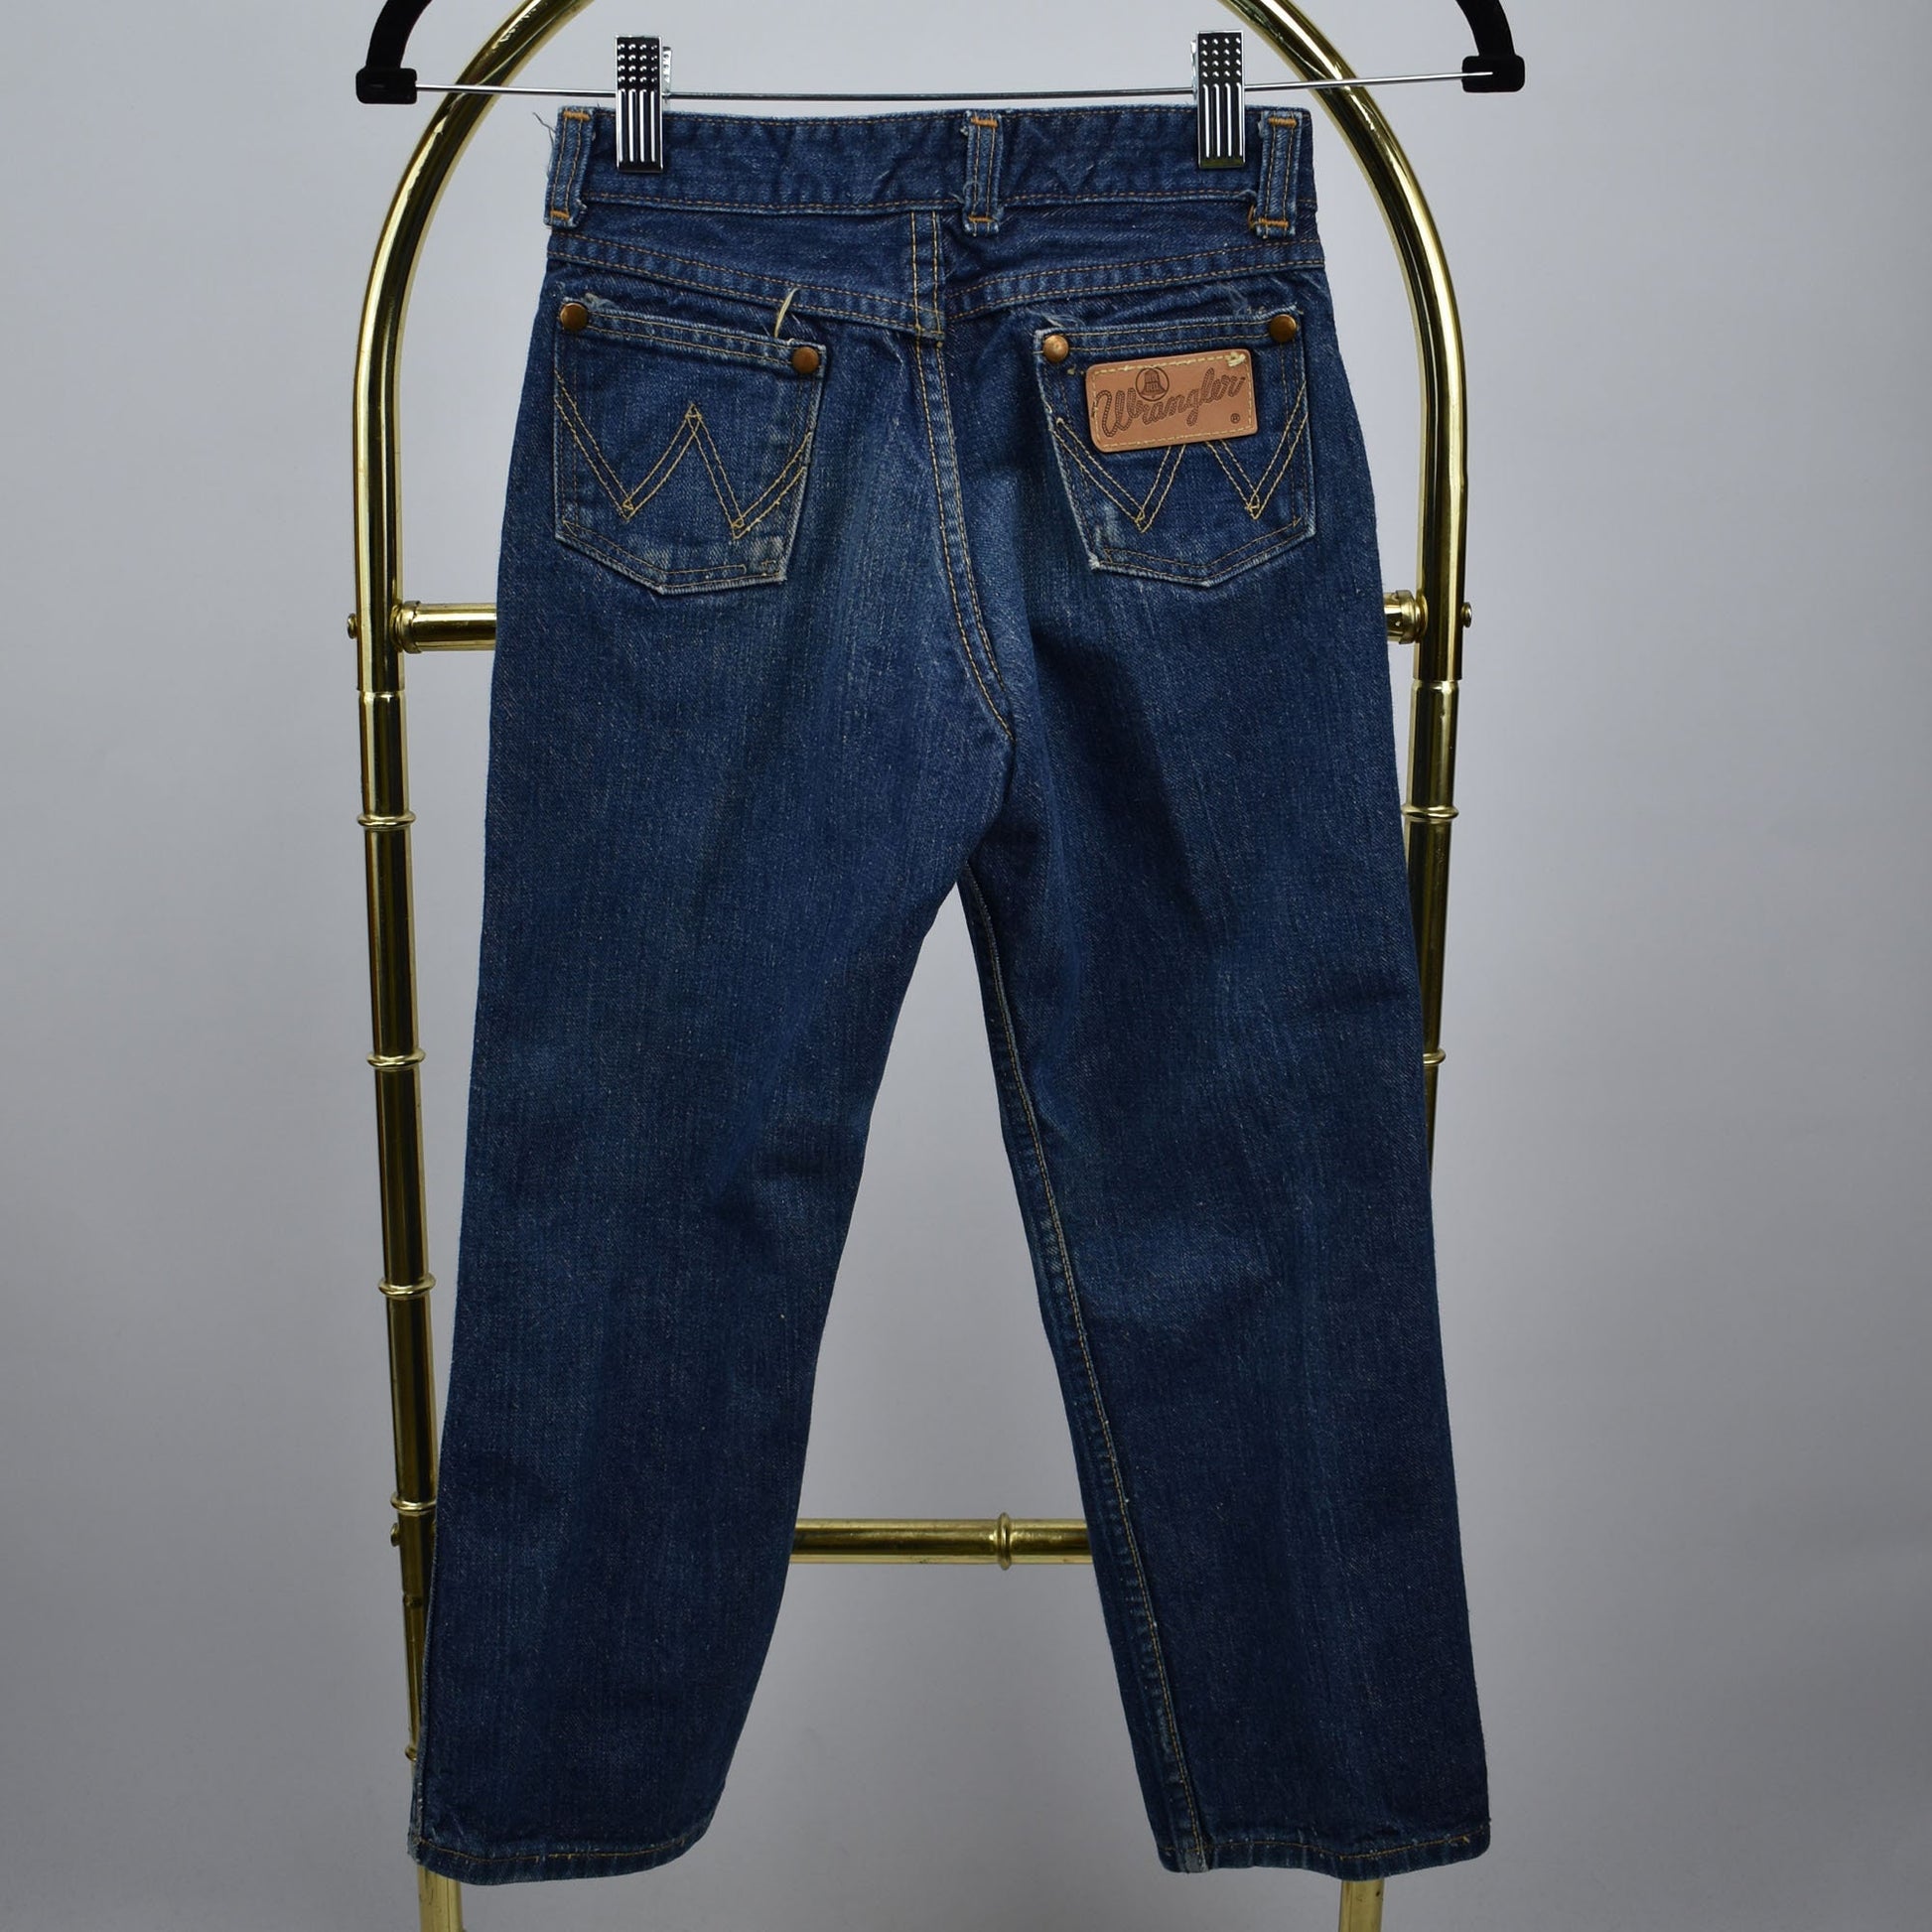 Vintage Kids 1950's Blue Bell Wrangler Jeans with a Gripper Zipper- Si –  The Only Vintage